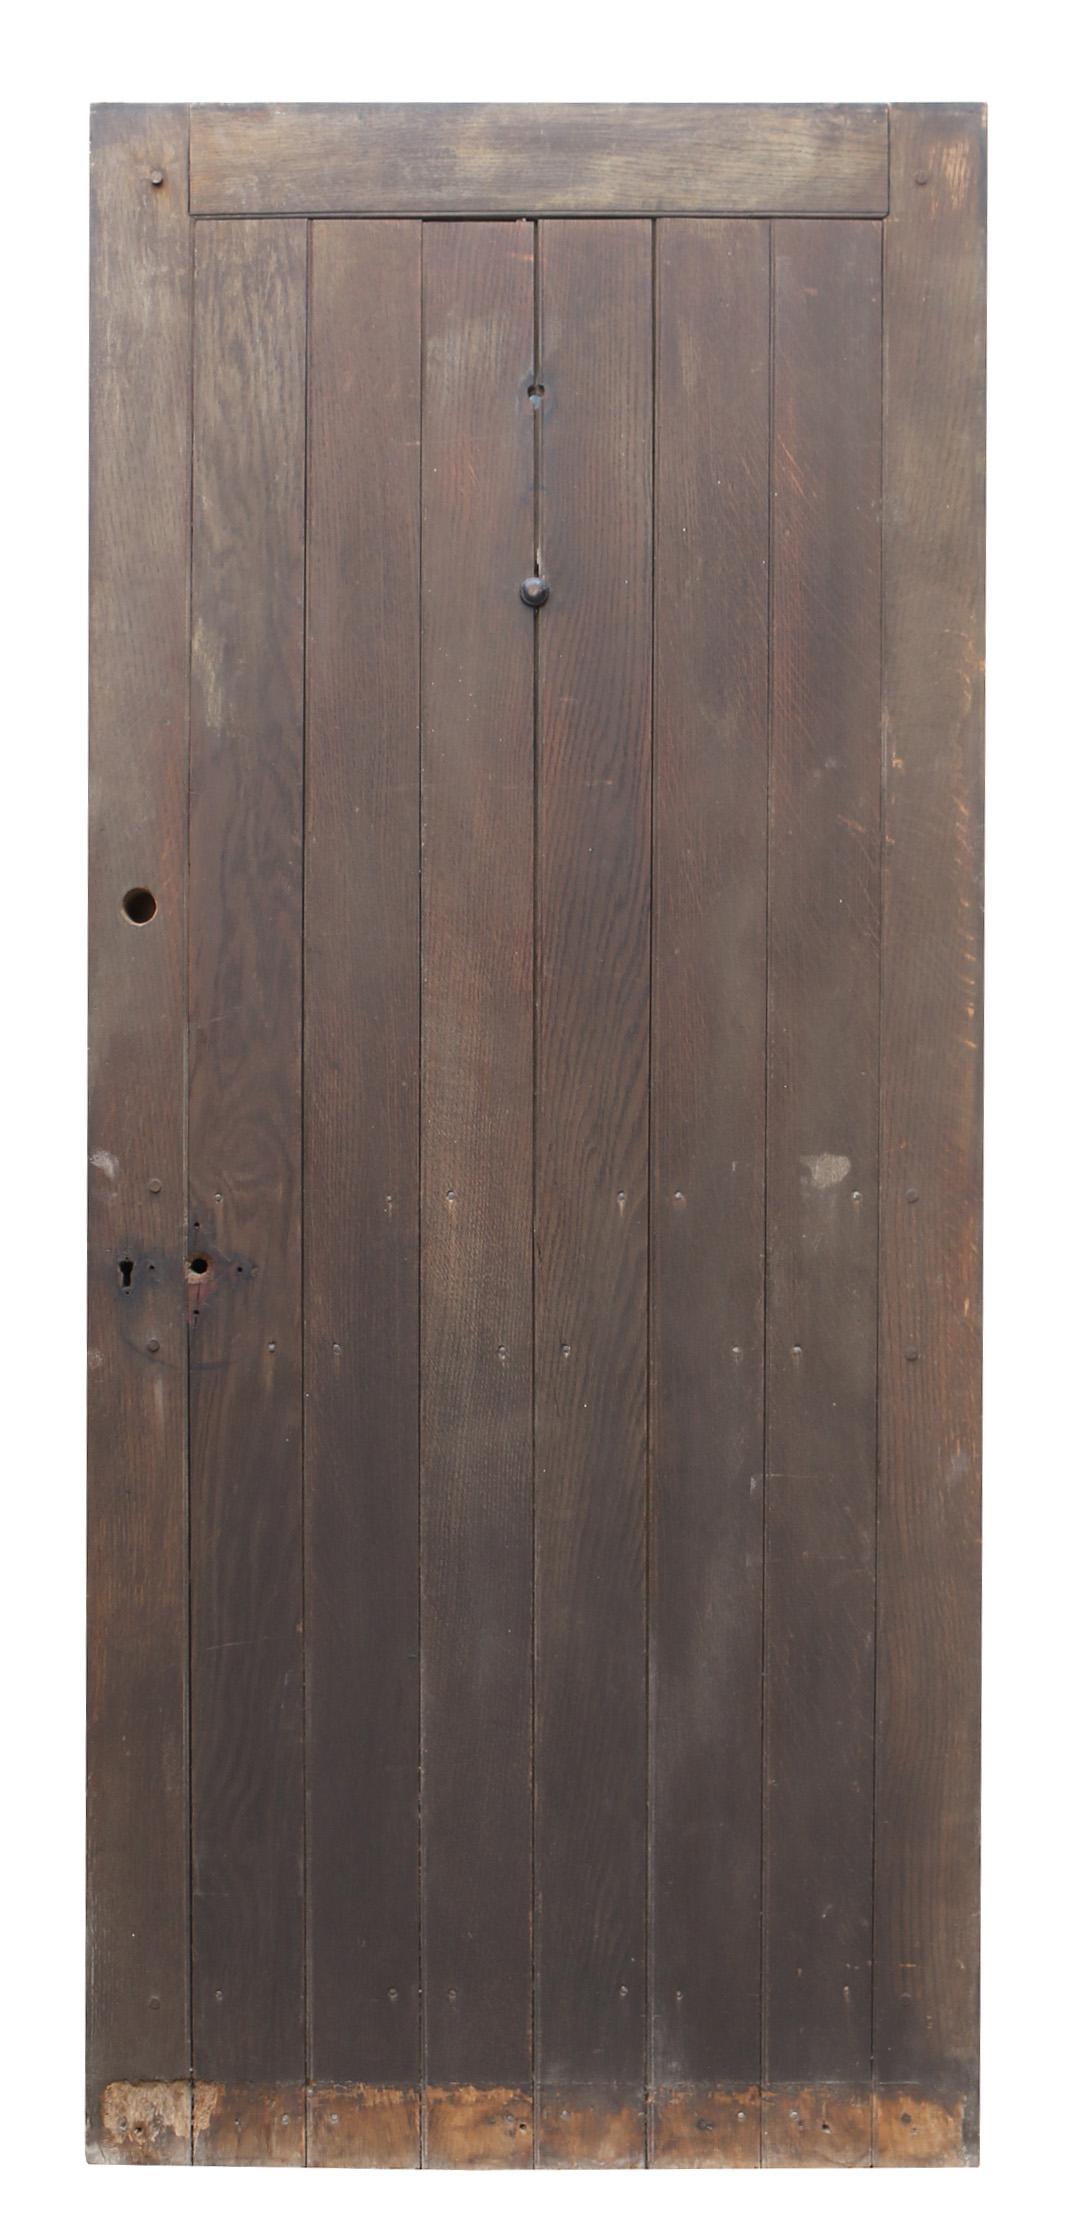 A reclaimed exterior door with an oak plank face and the appearance of a two panel door on the reverse side.